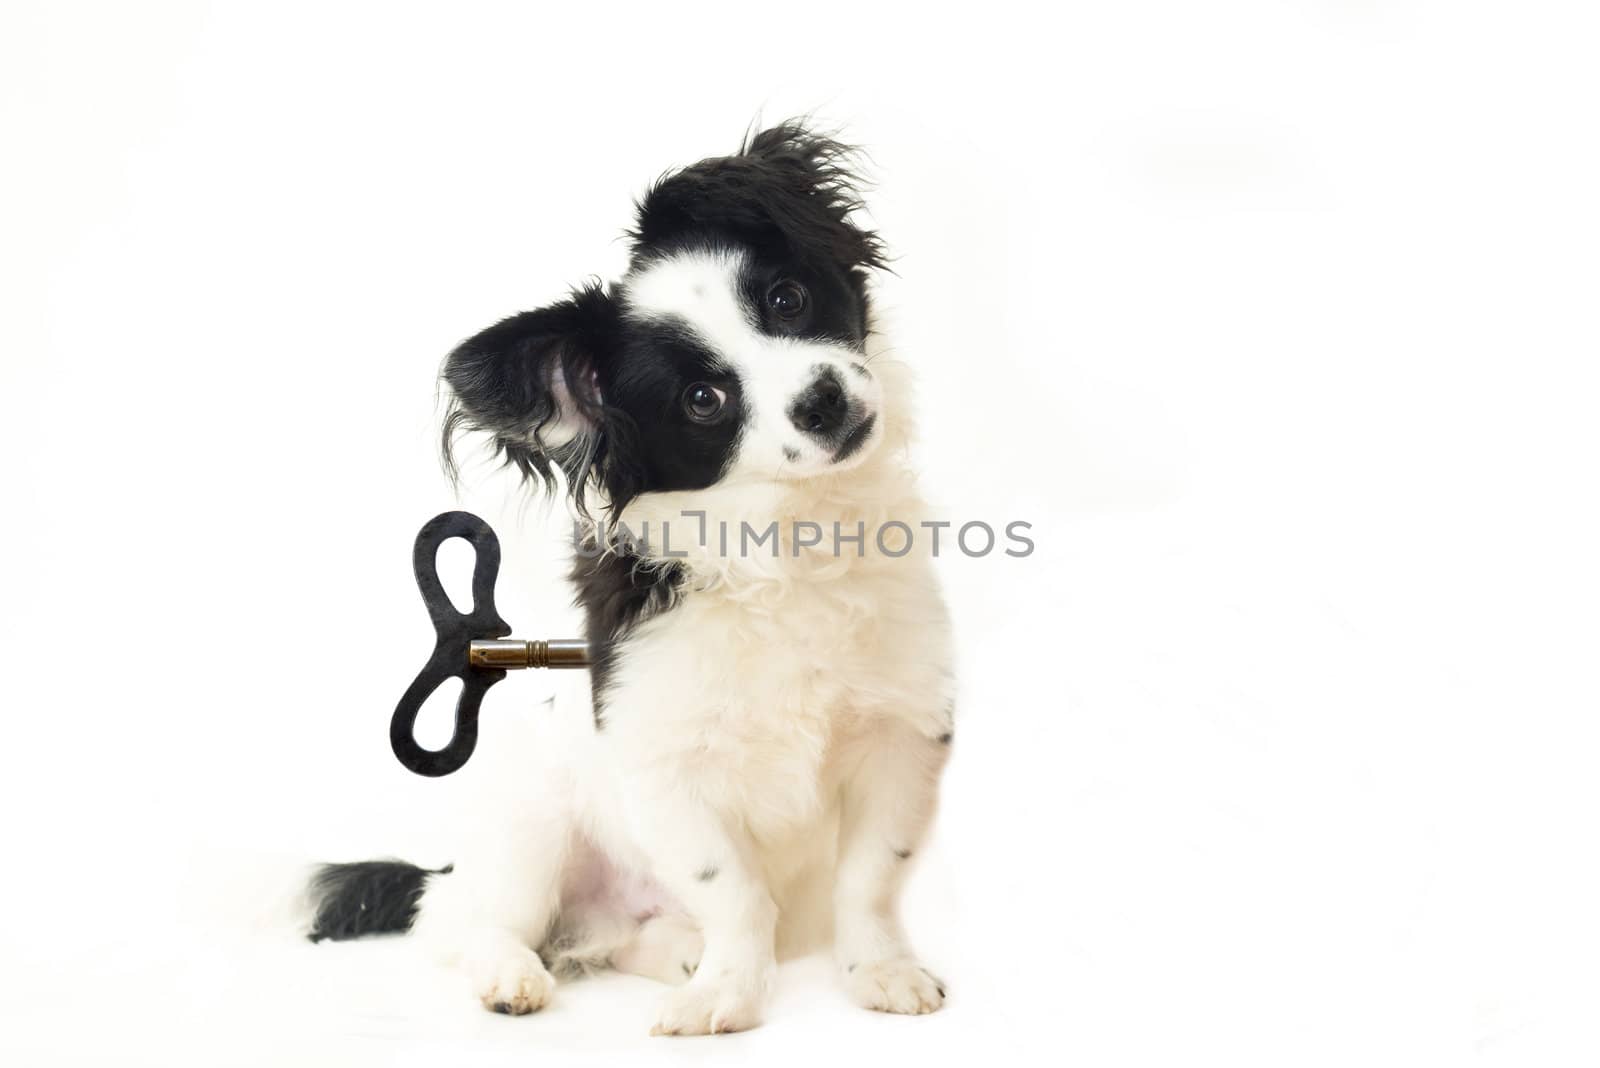 abandoned puppy, dog toy concept, isolated on white